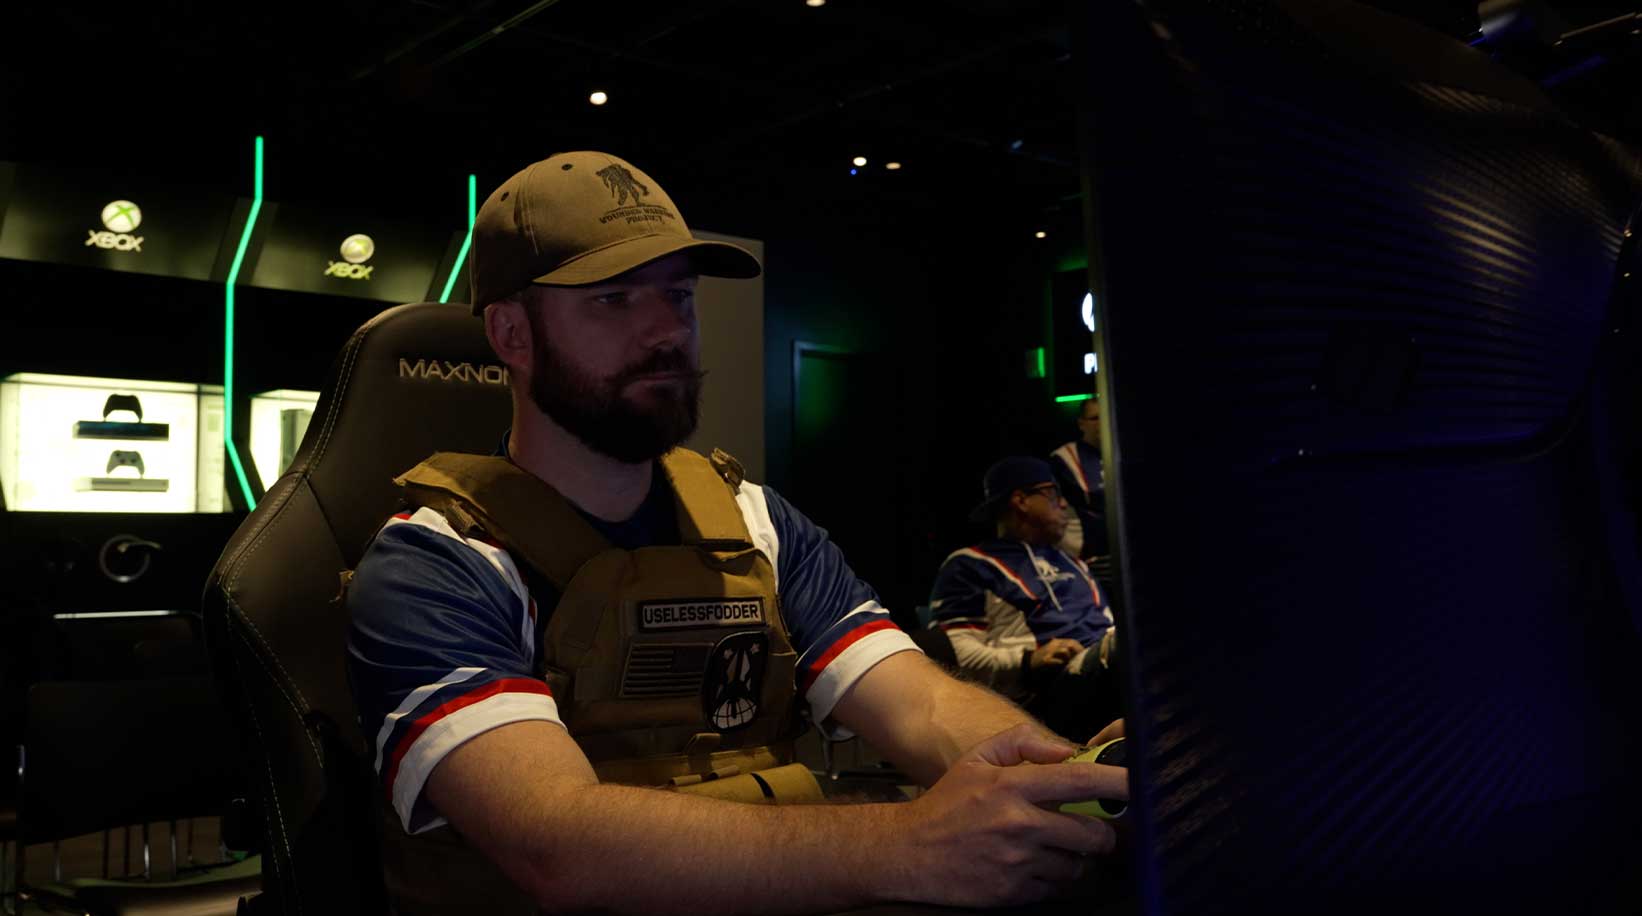 Wounded Warrior Project's 2021 Annual Warrior Survey shows that 47% of surveyed warriors play video games, averaging about 17 hours per week, significantly more than most U.S. adults.